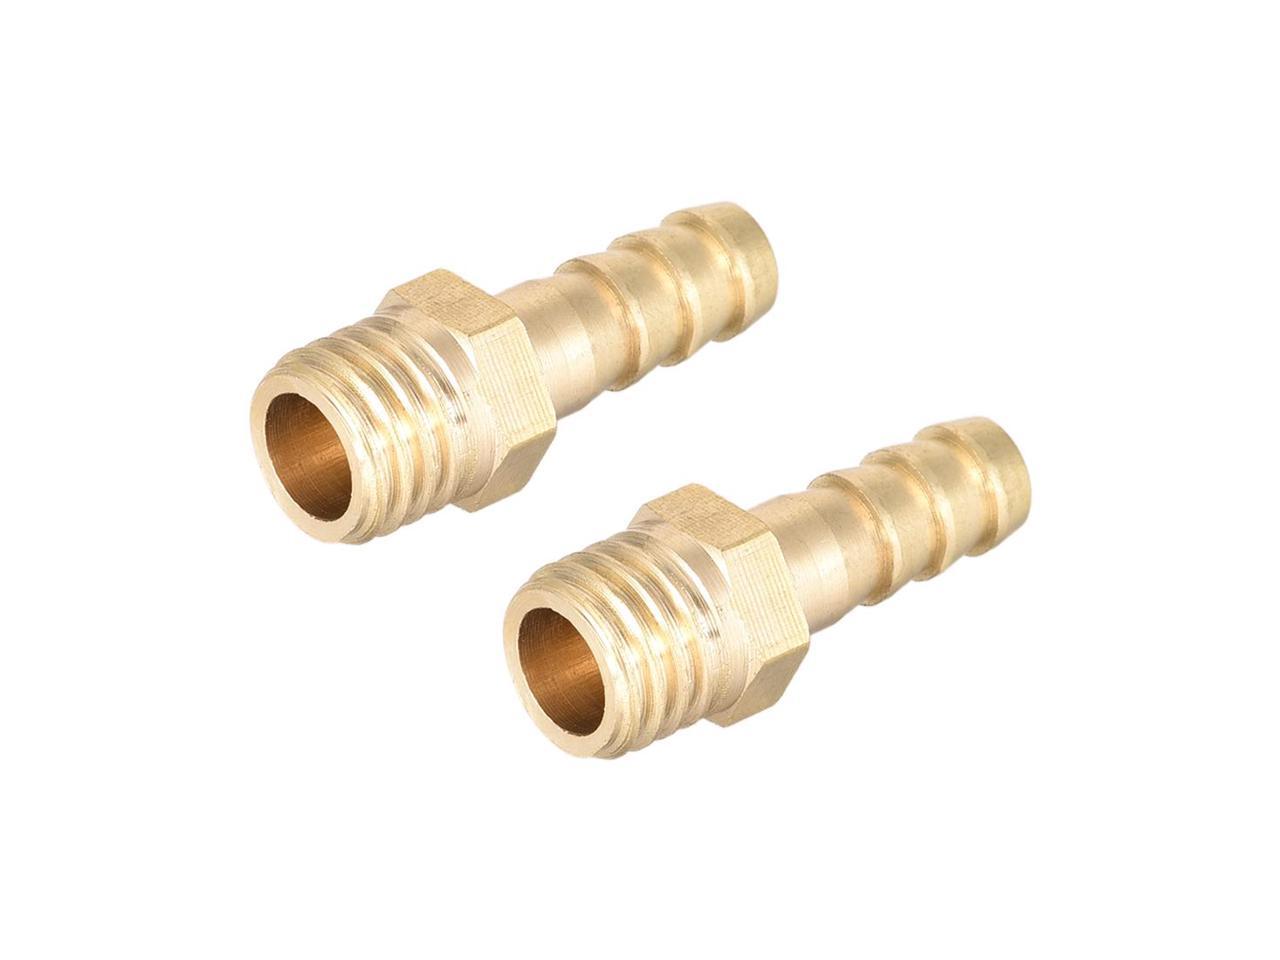 Pipe Fittings Brass Fitting Connector Metric M12x1.75 Male to Barb Hose ID 8mm 2pcs